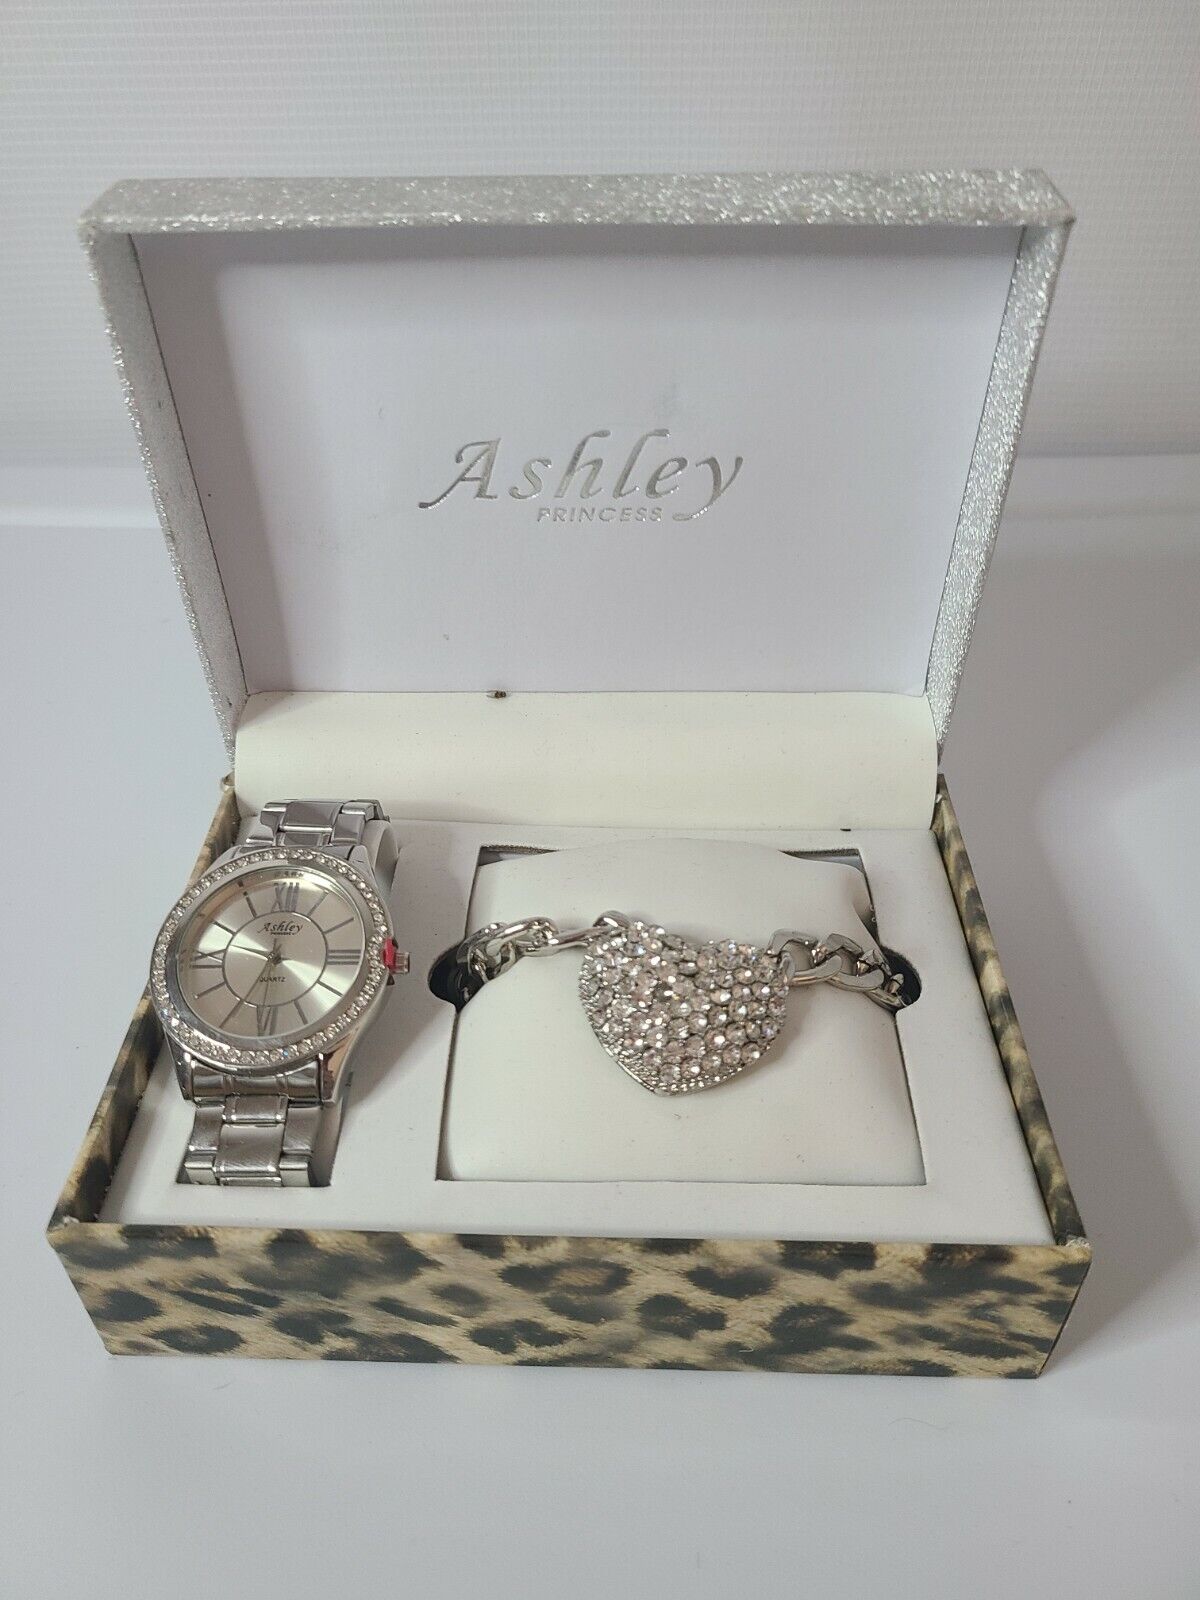 analie pacana recommends Ashley Princess Watches